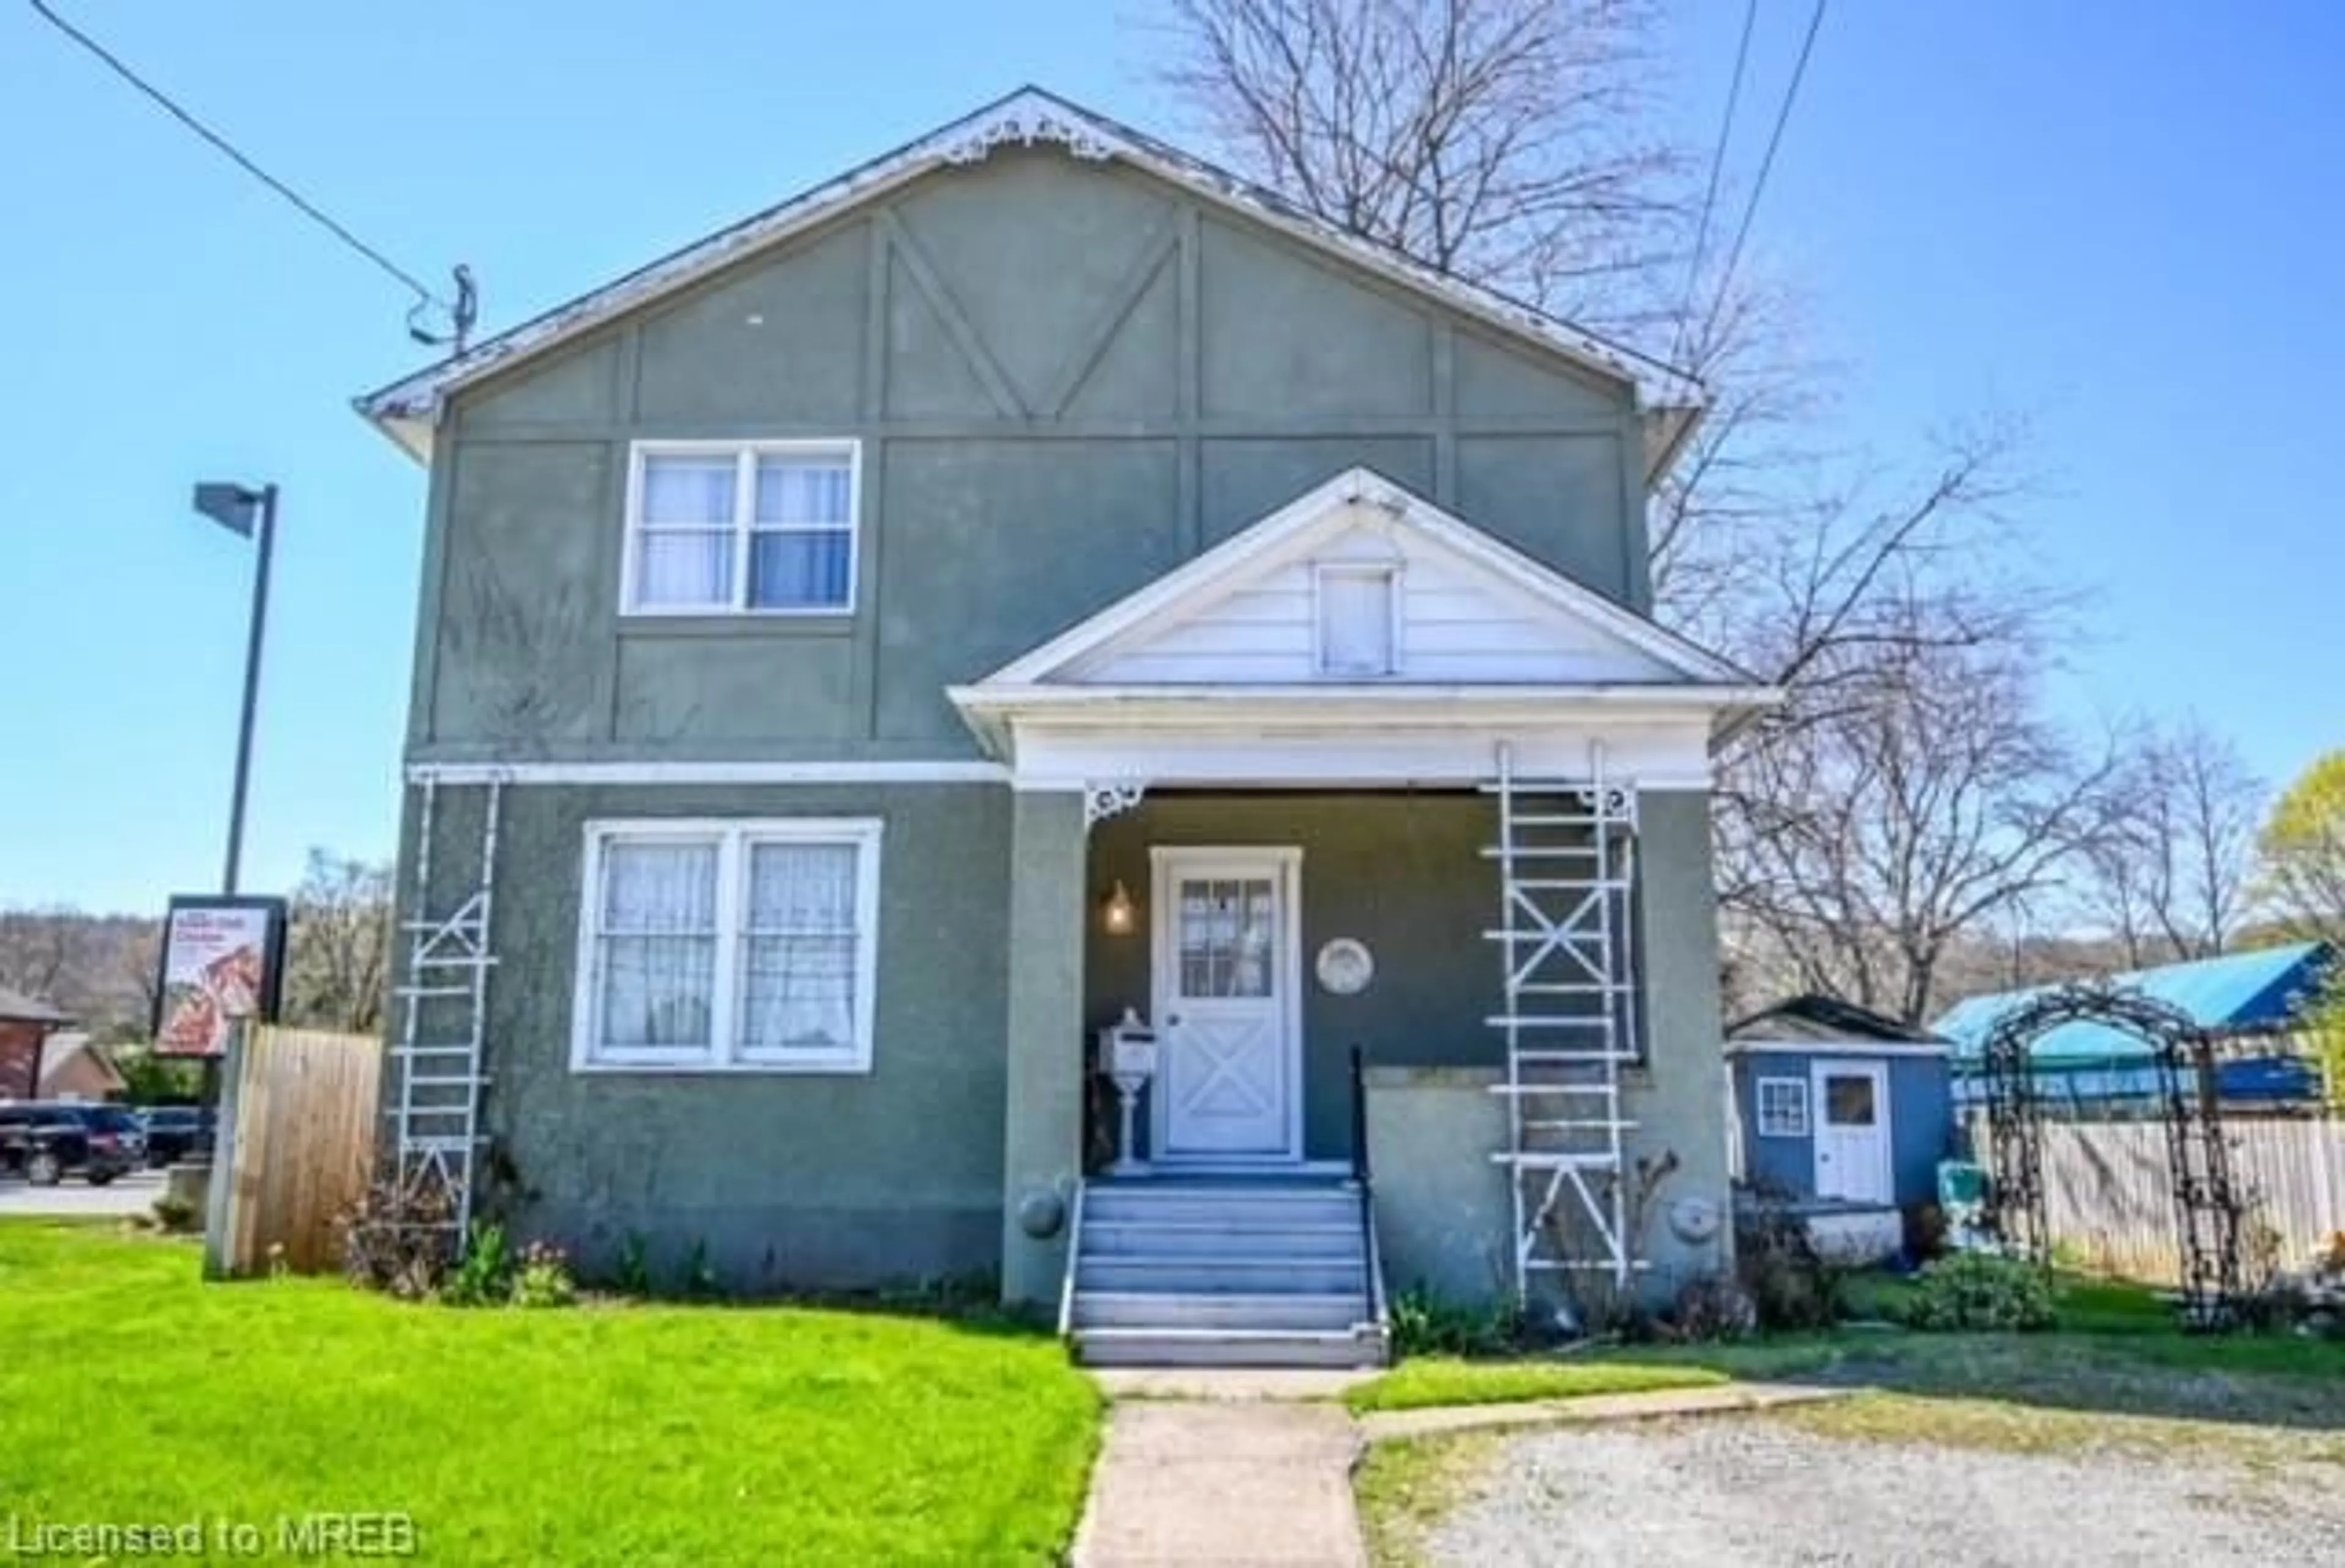 Frontside or backside of a home for 140 Main St, Grimsby Ontario L3M 1P1